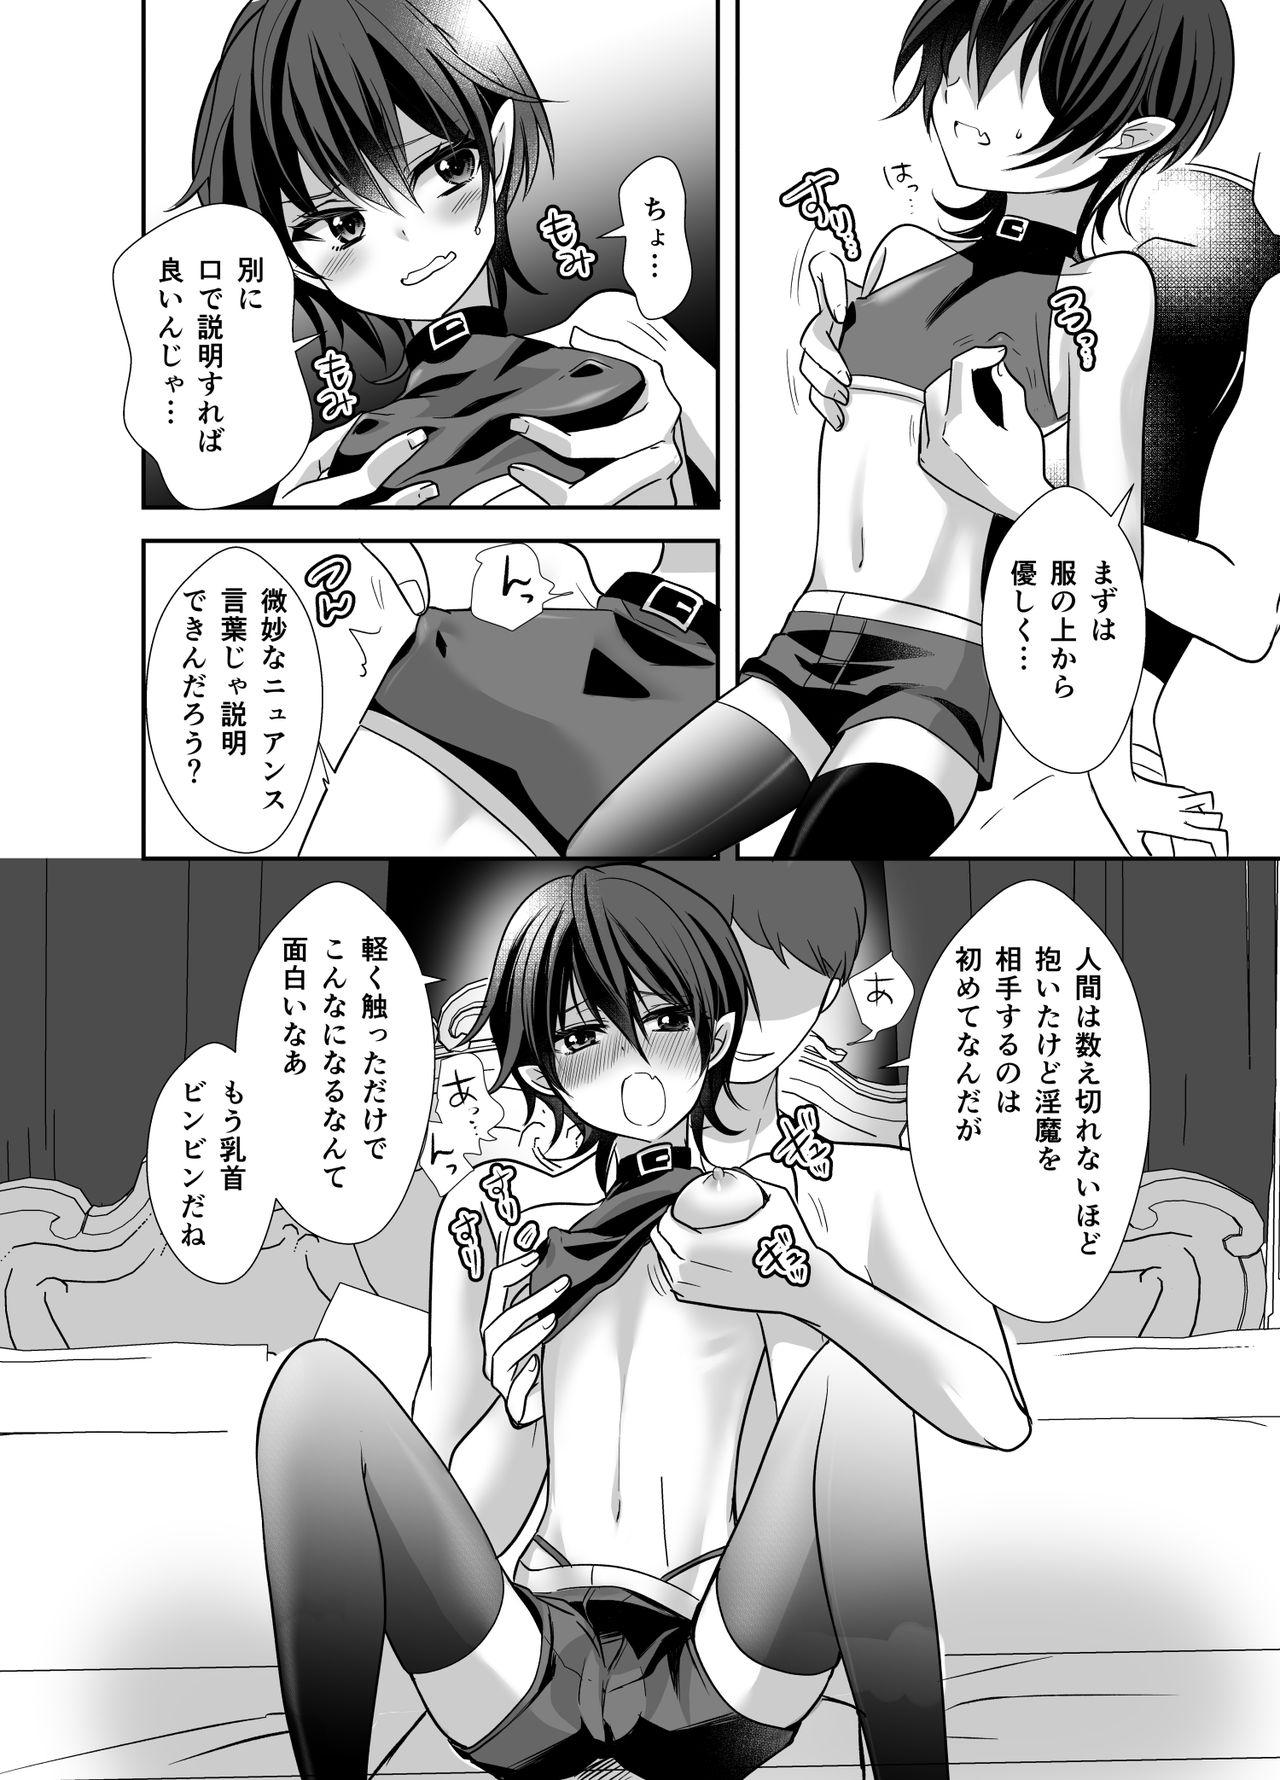 Parody 転生したらエリート淫魔でした - Original Transsexual - Page 5